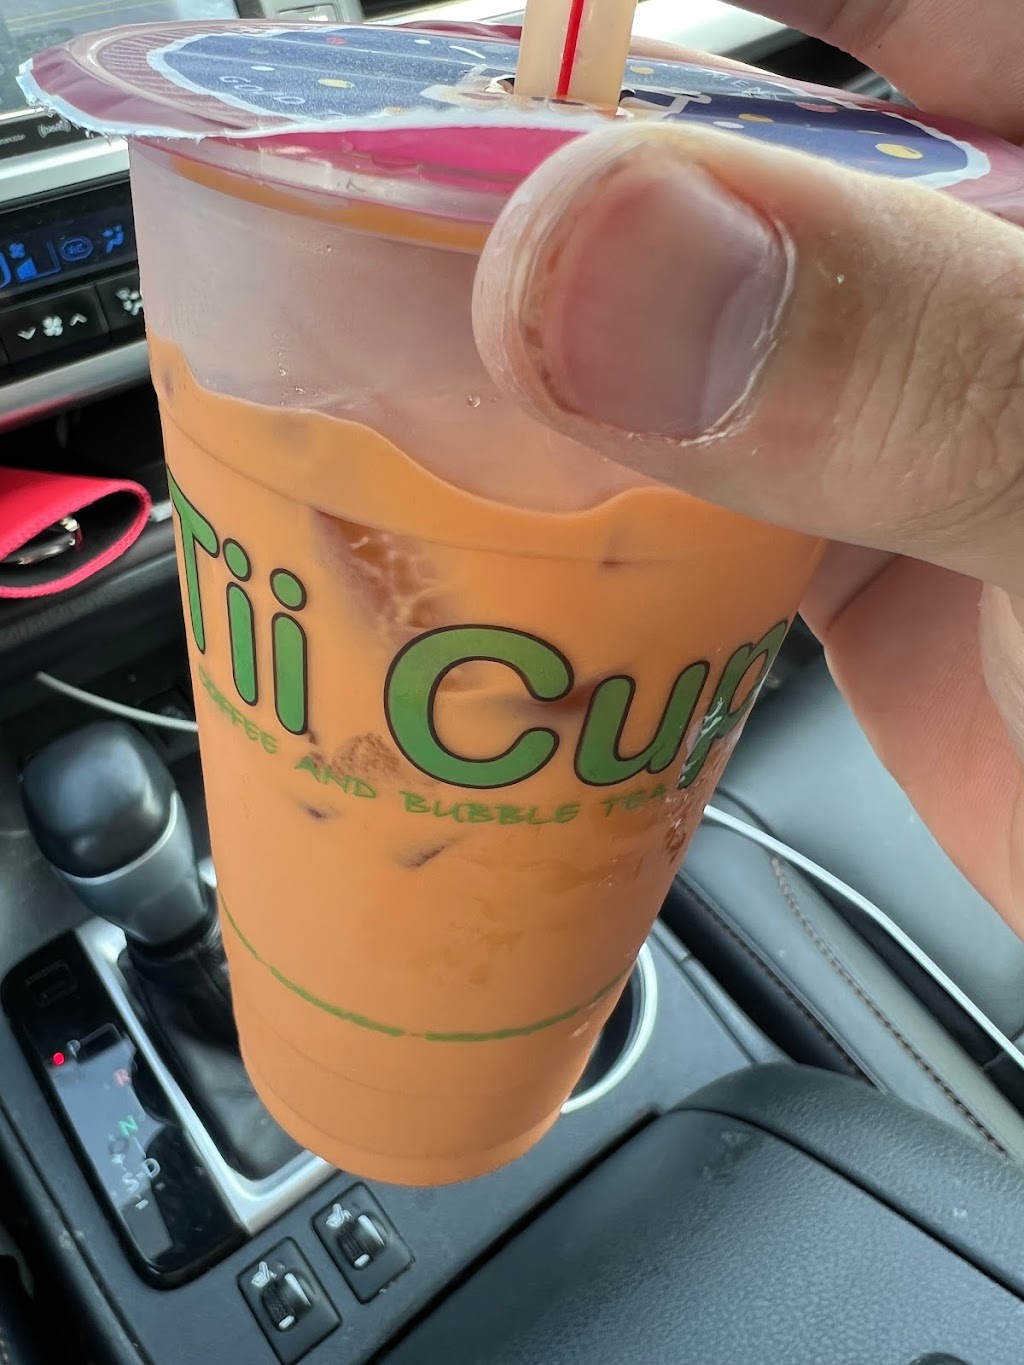 Tii Cup | 14115 Irving Ave S, Burnsville, MN 55337, USA | Phone: (612) 417-1500